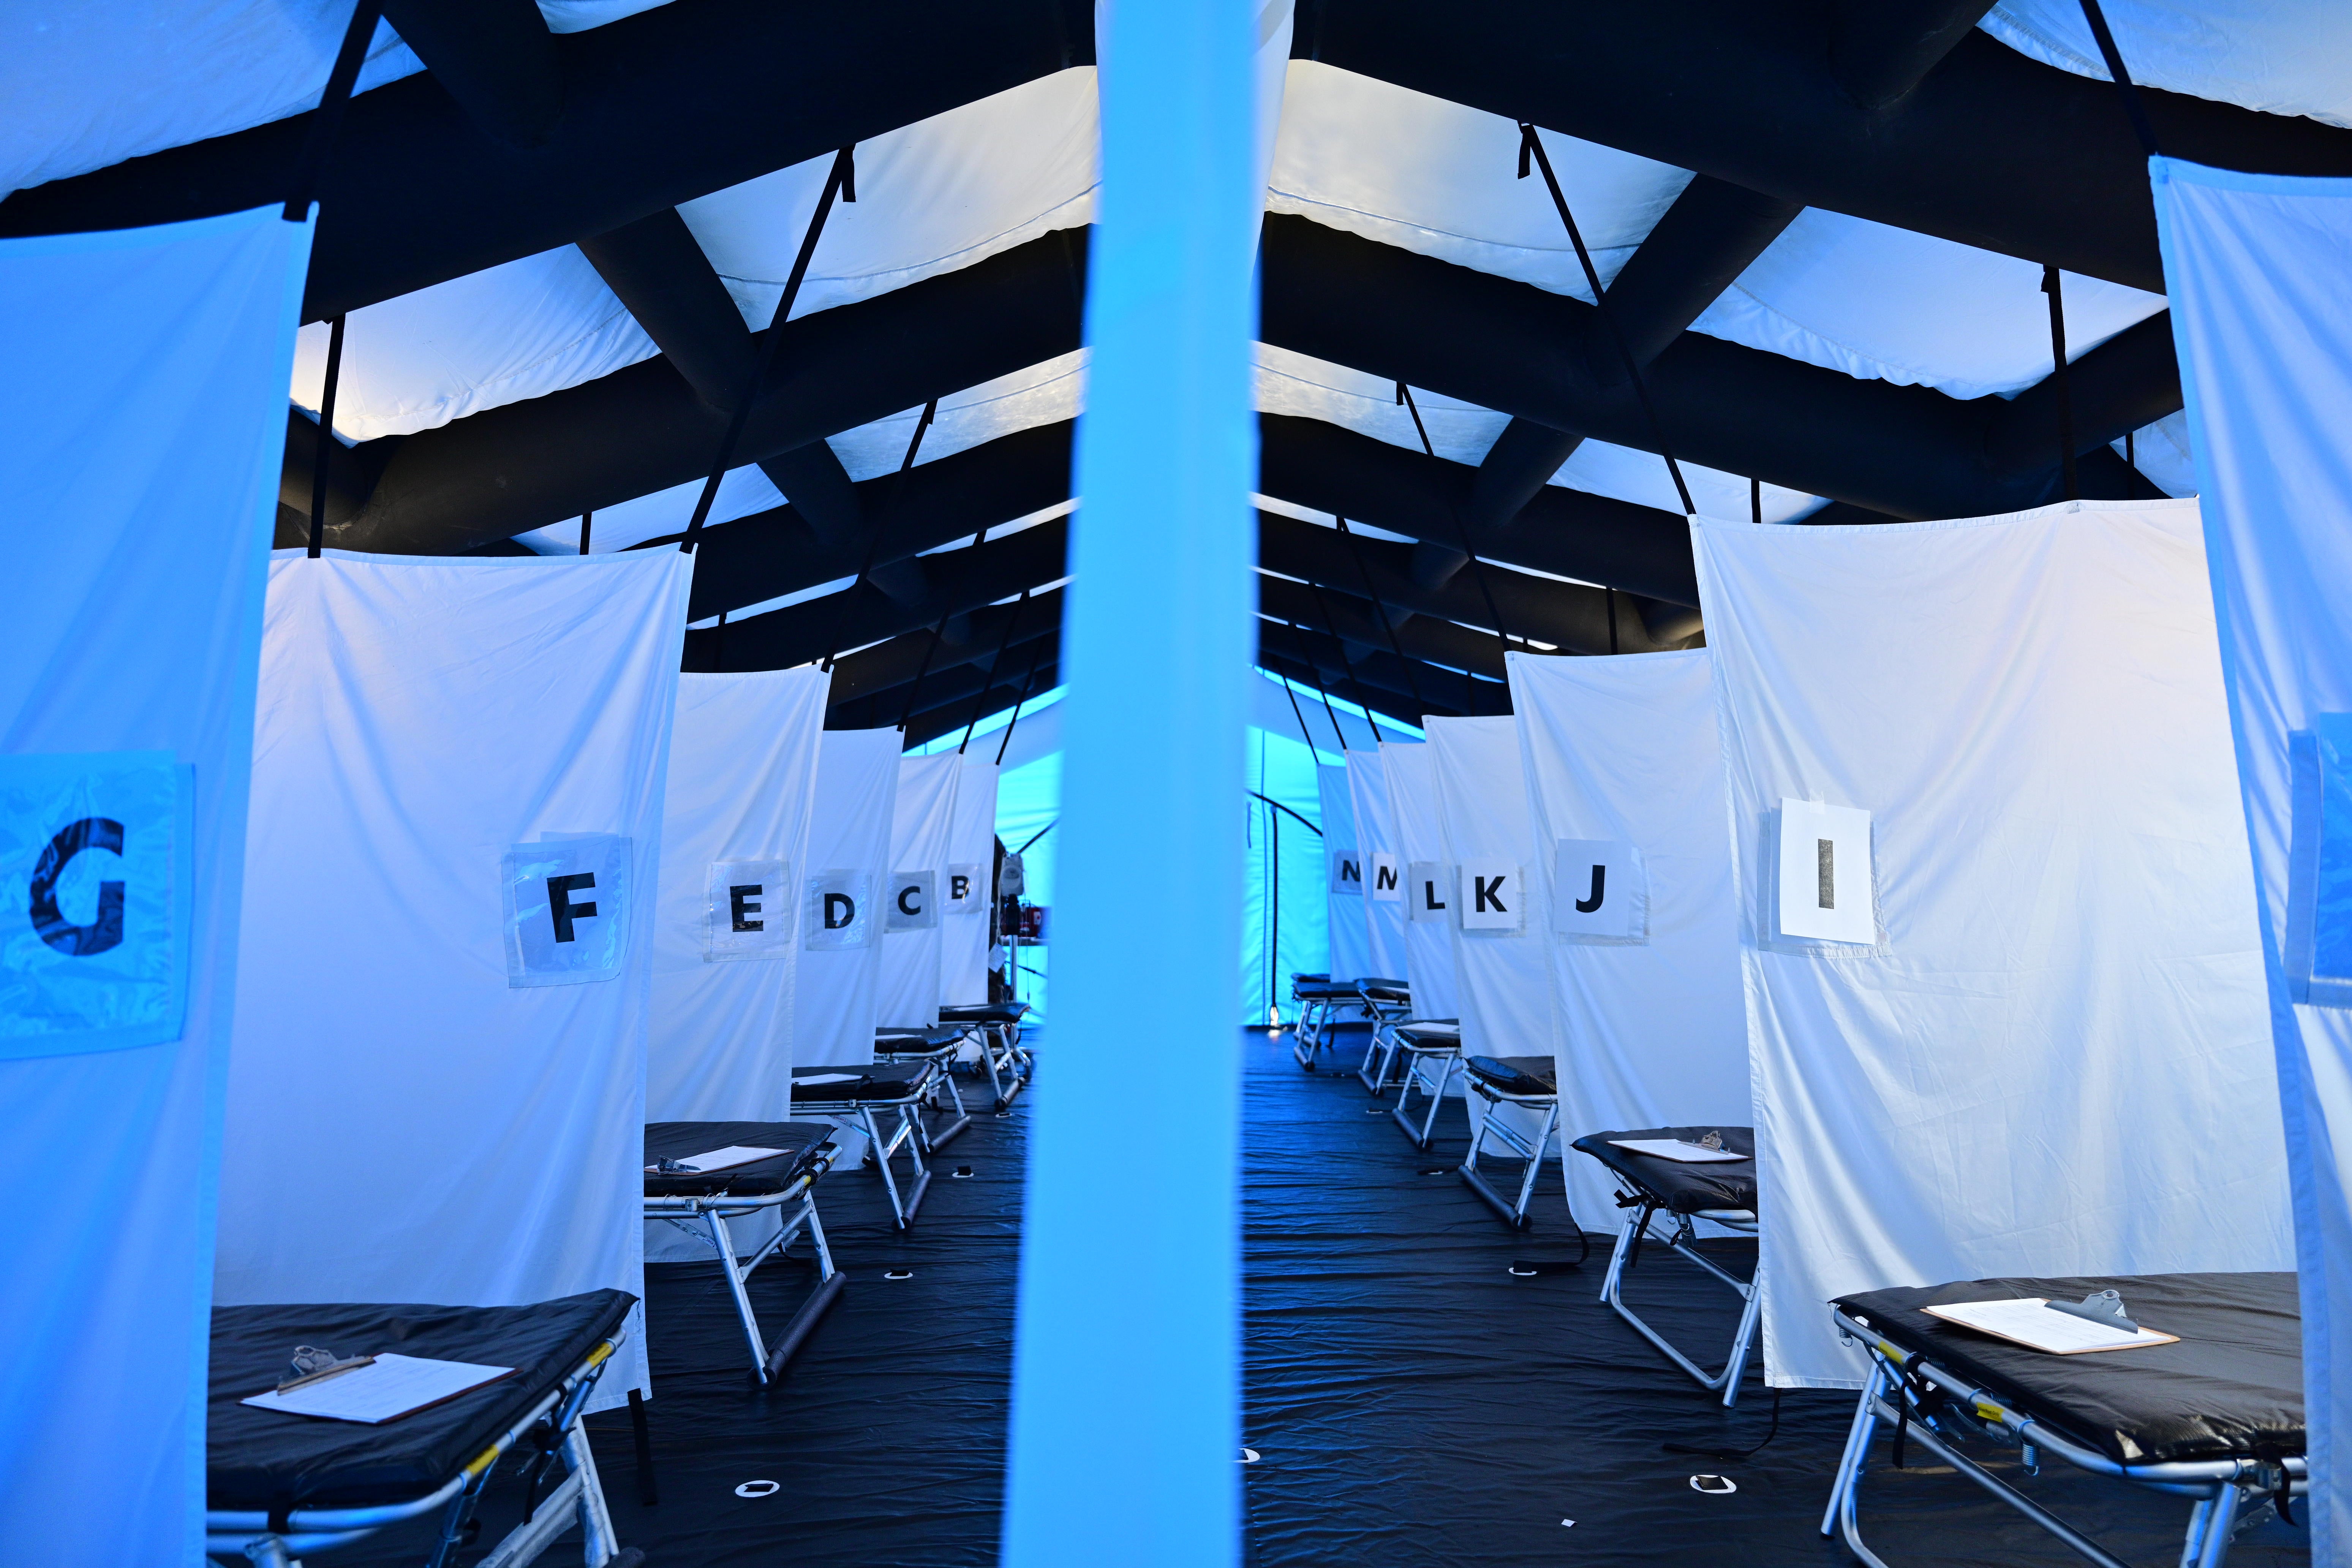 Rows of beds and their letter designations are seen in a tent used for monoclonal antibody treatment of COVID-19 patients outside of St. Claire Regional Medical Center on September 16, 2021 in Morehead, Kentucky.